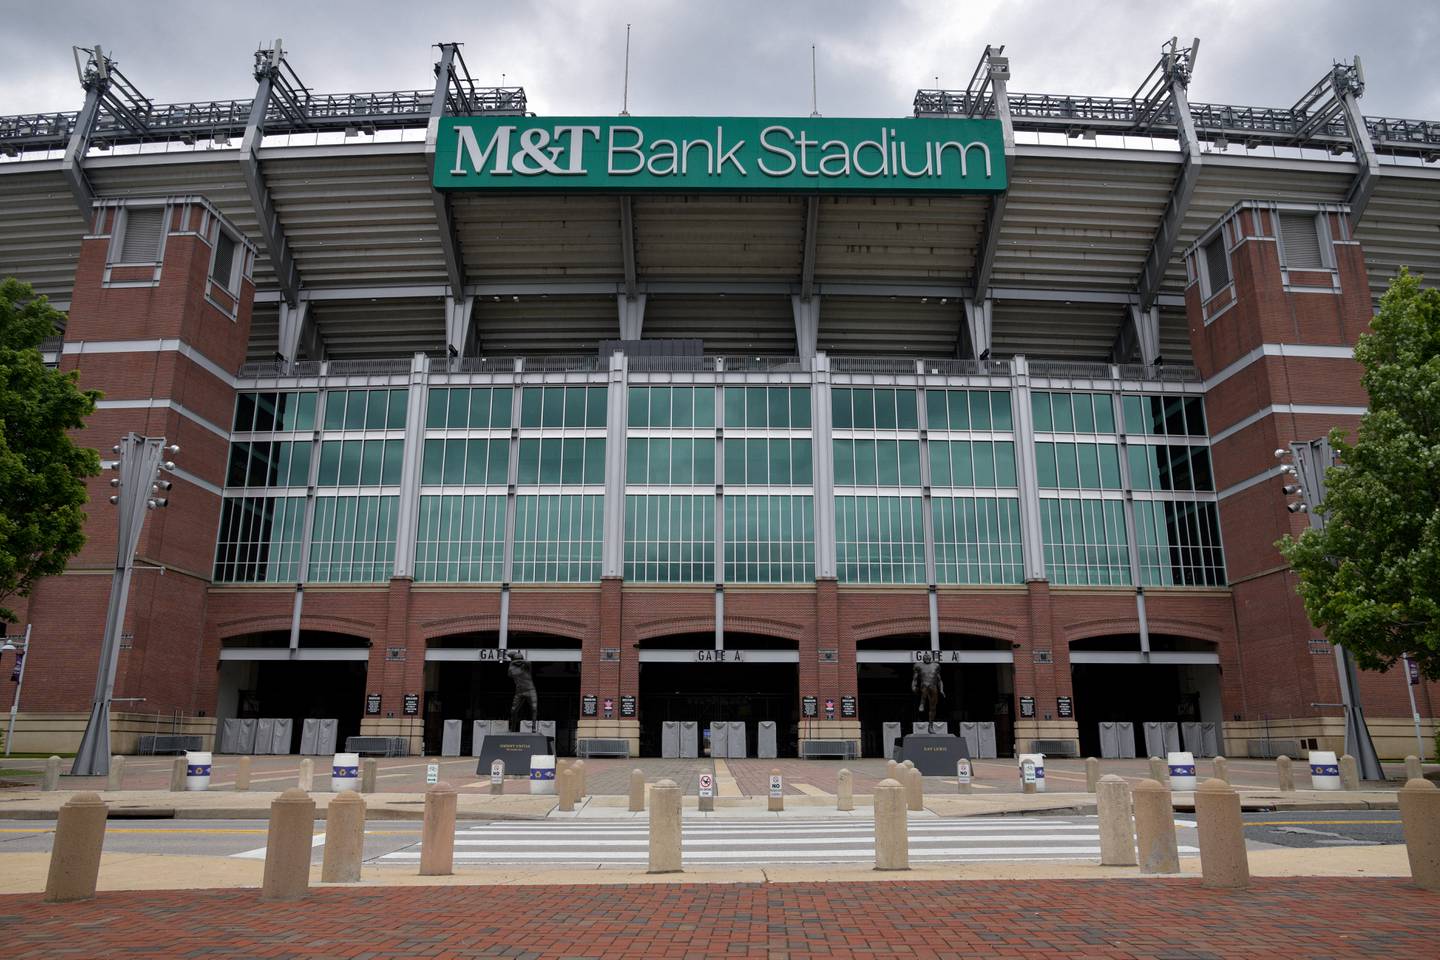 The exterior of M&T Bank Stadium, home of the Baltimore Ravens, in South Baltimore.